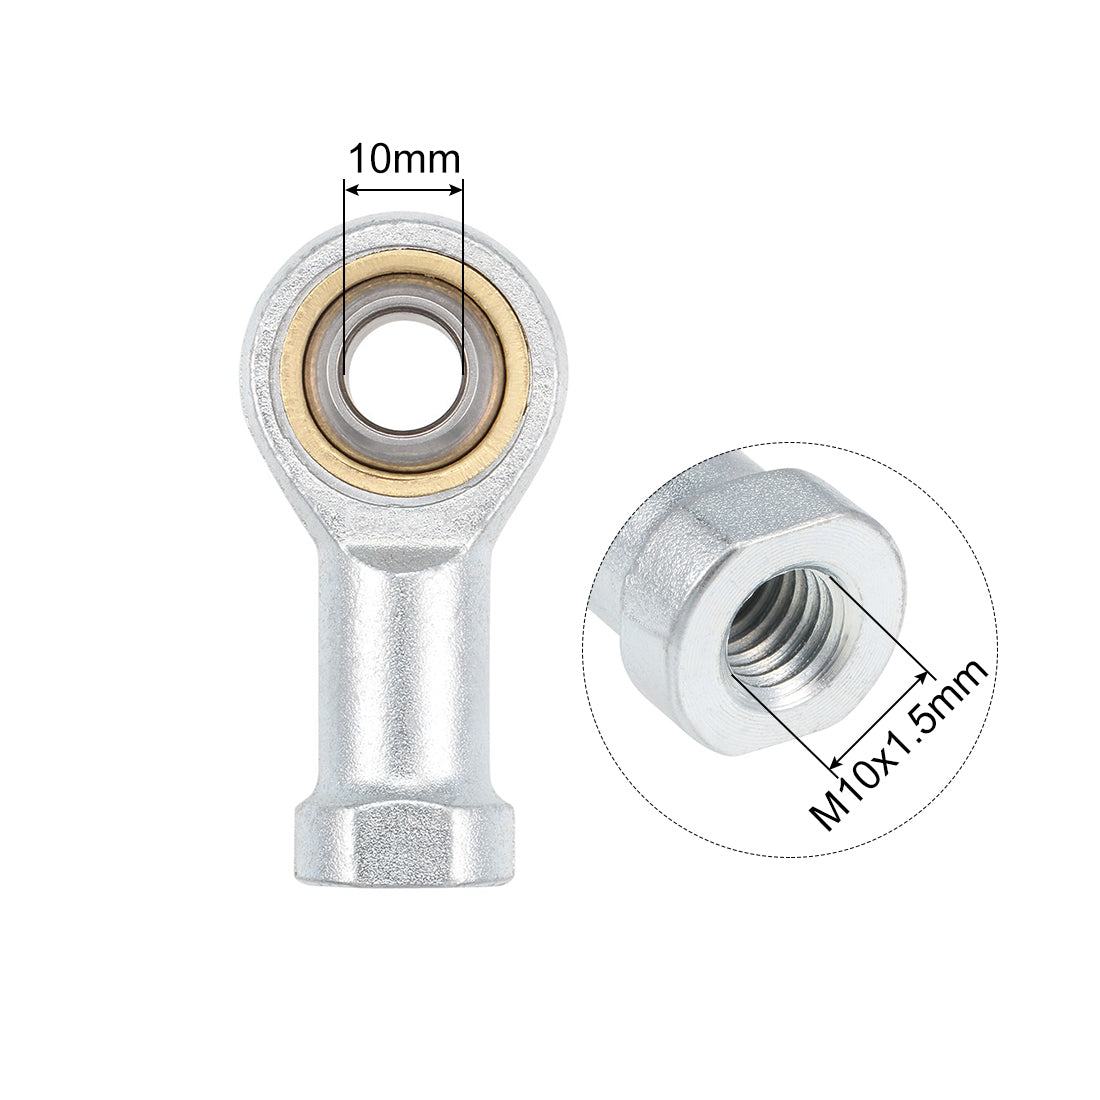 uxcell Uxcell 10mm Rod End Bearing M10x1.5mm Rod Ends Ball Joint Female Left Hand Thread 2pcs